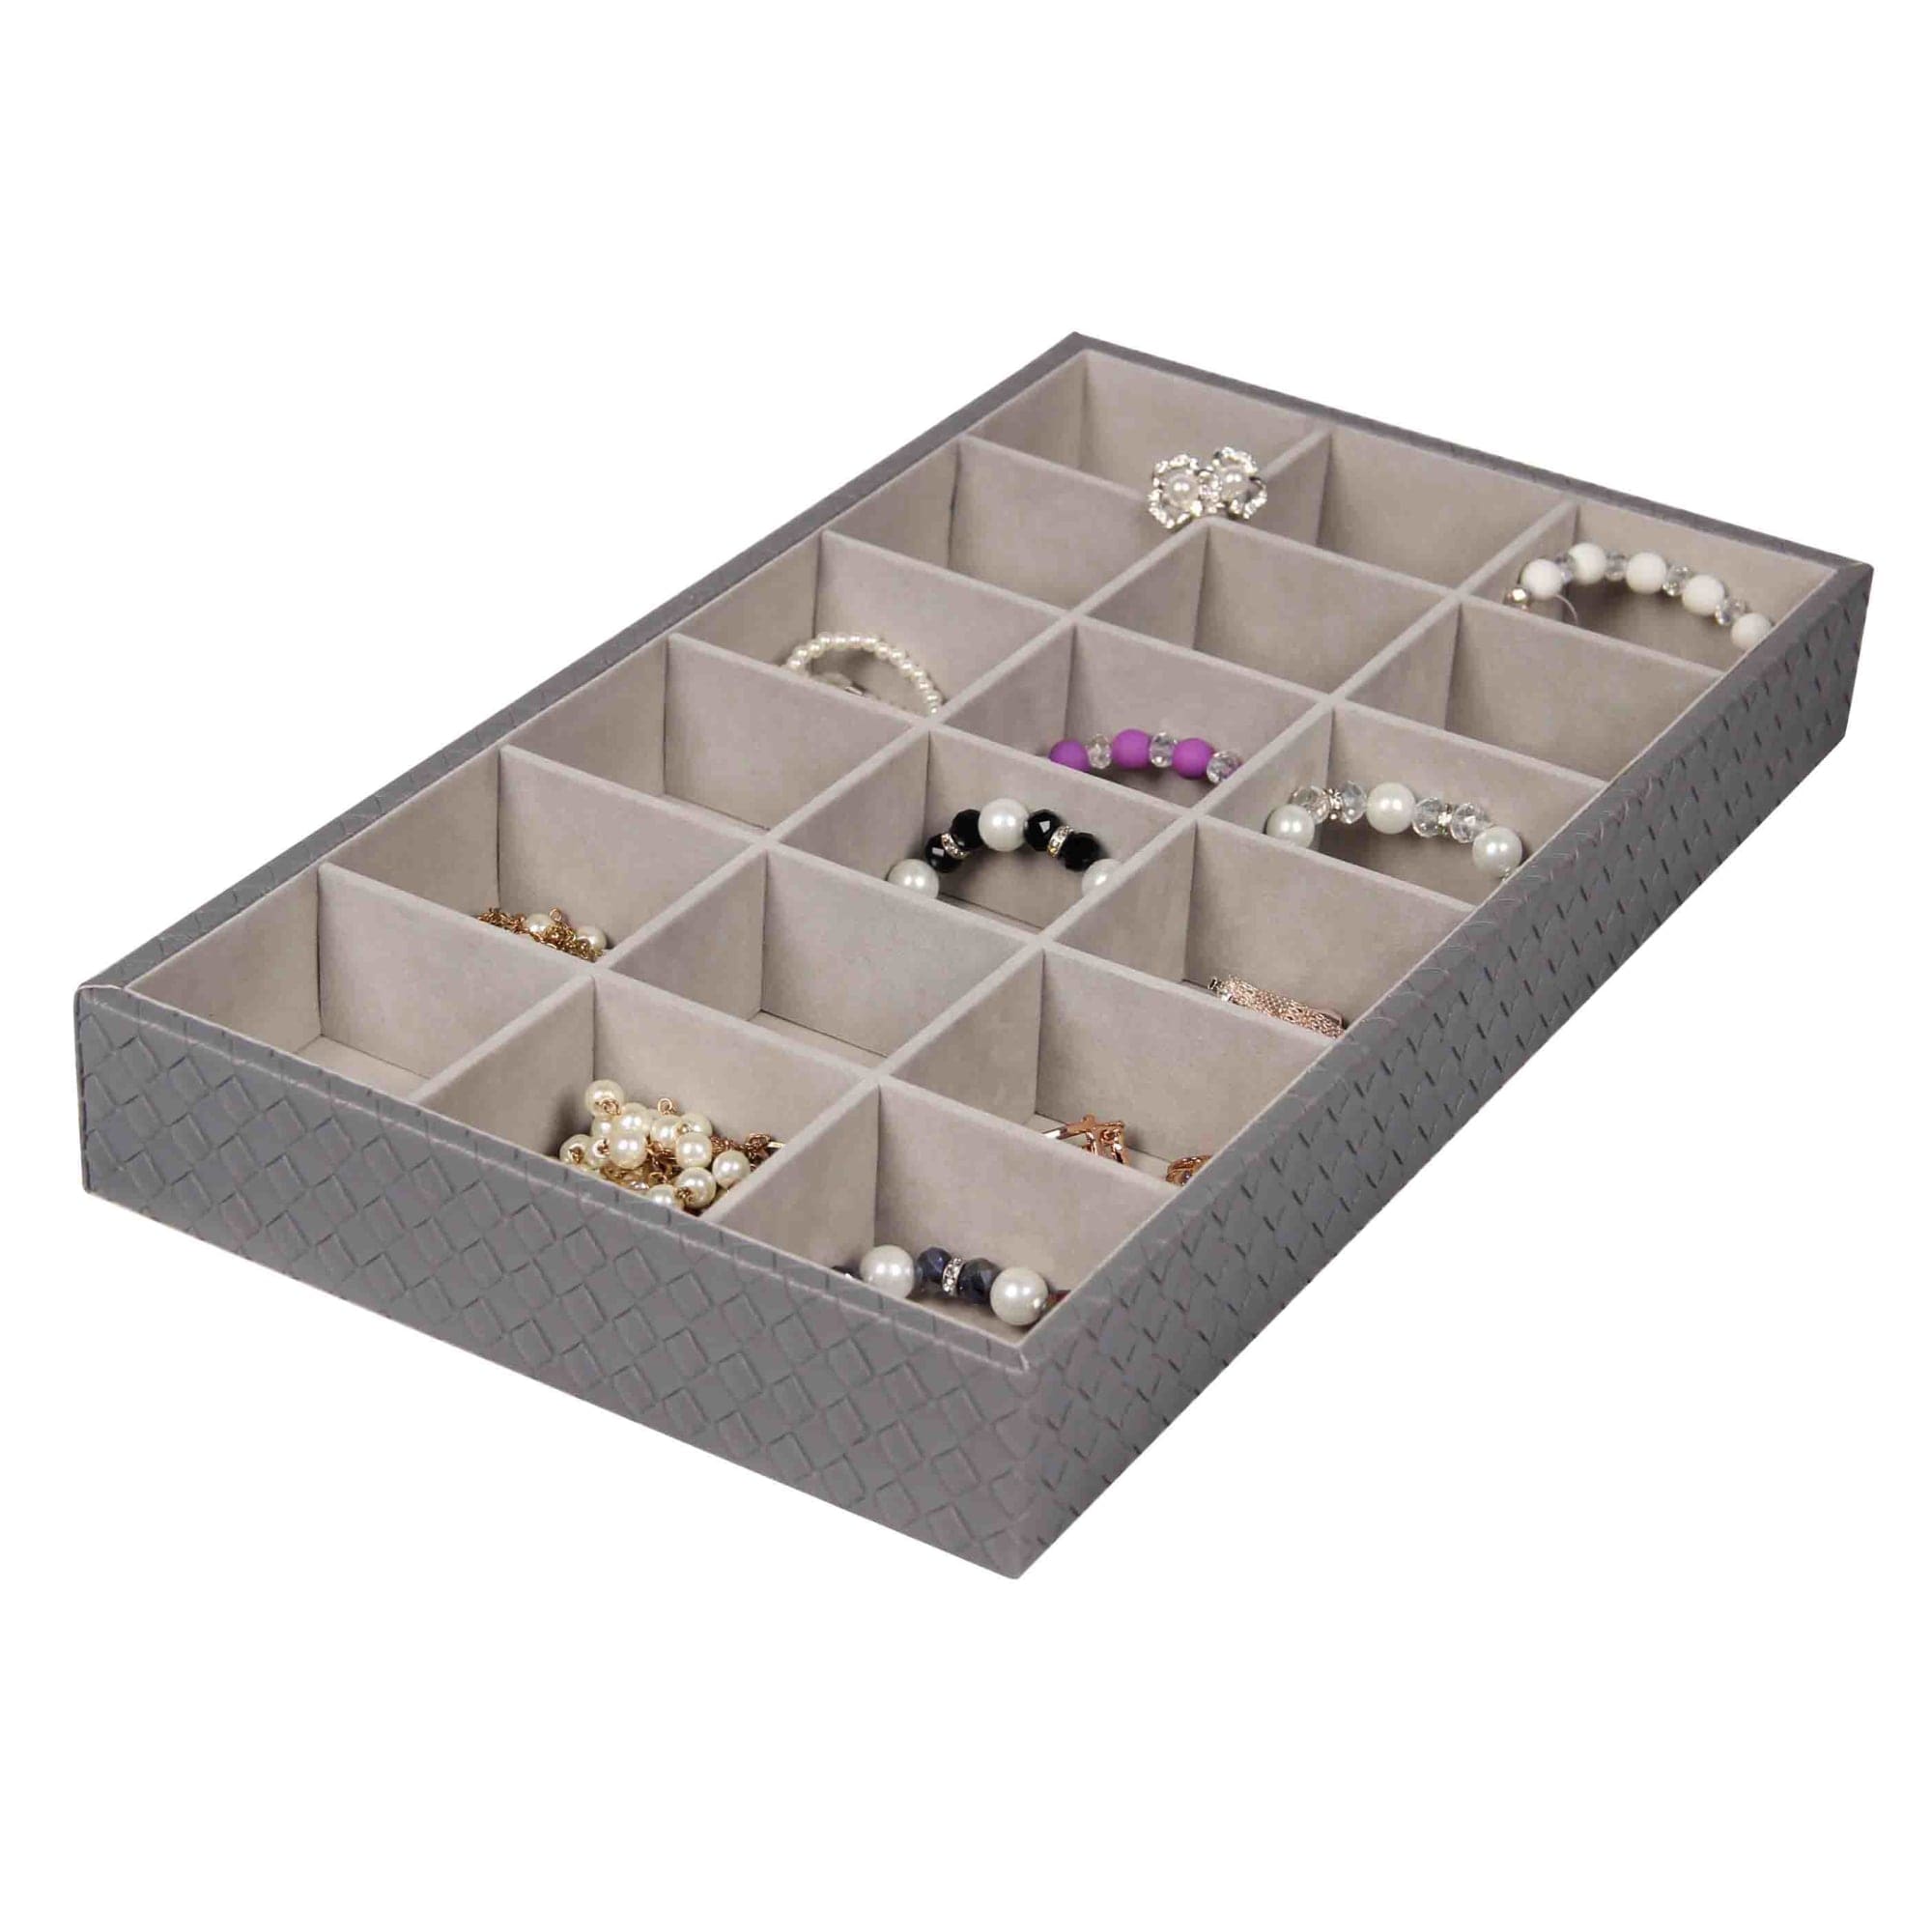 Home Basics Faux Leather 18 Compartment Jewelry Organizer $10.00 EACH, CASE PACK OF 6